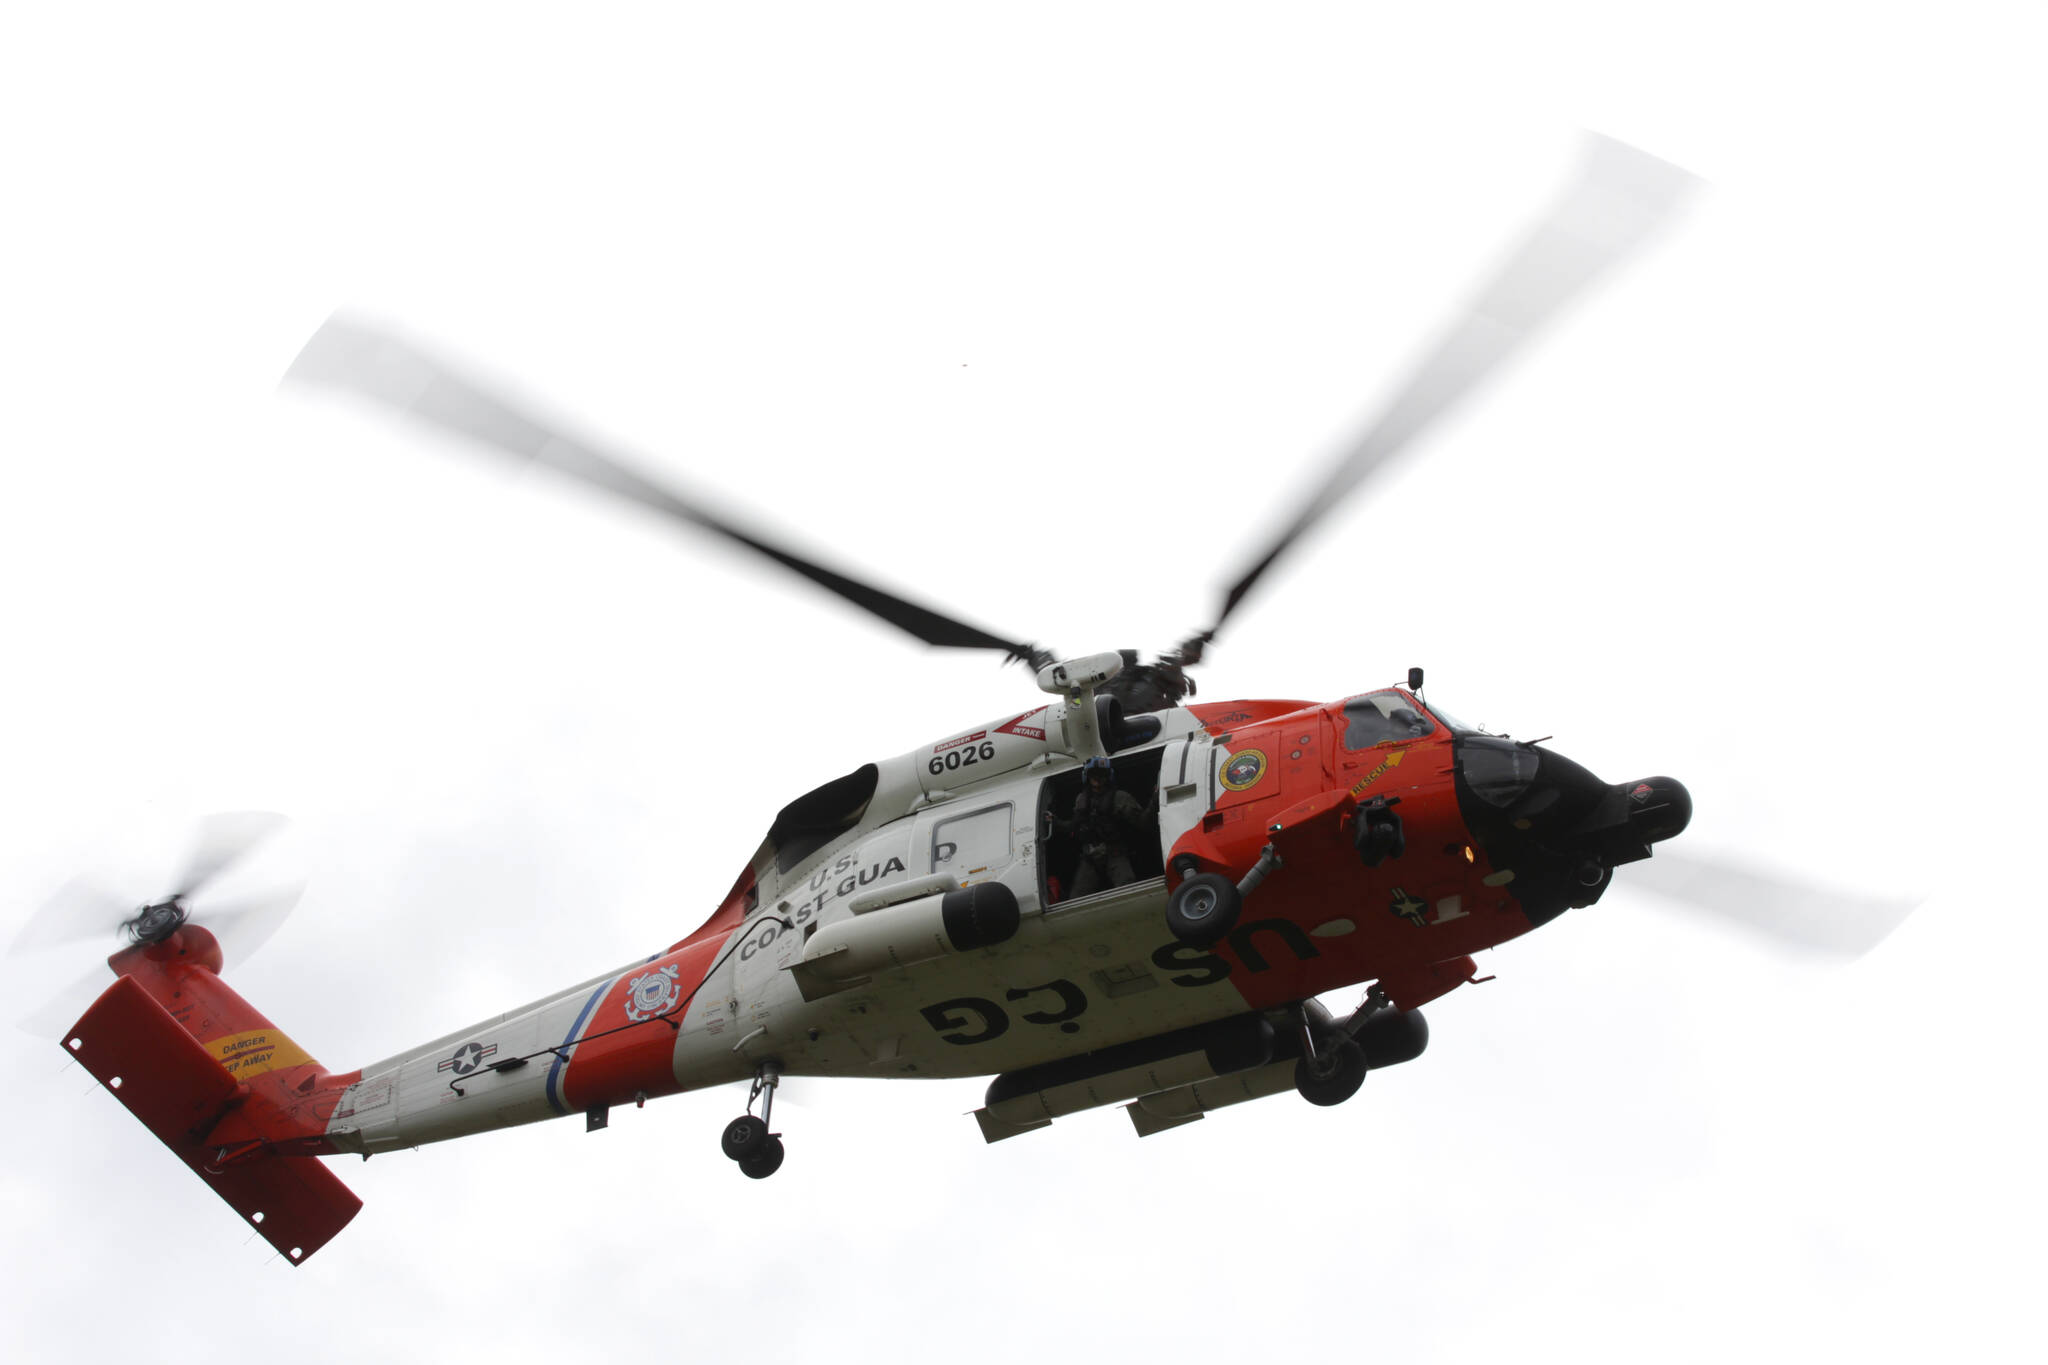 A Coast Guard MH-60 Jayhawk rescued four kayakers from the Elk River near Bay City on Wednesday night, April 12, after one went in the water while fighting heavy tides. (Michael S. Lockett / The Daily World File)